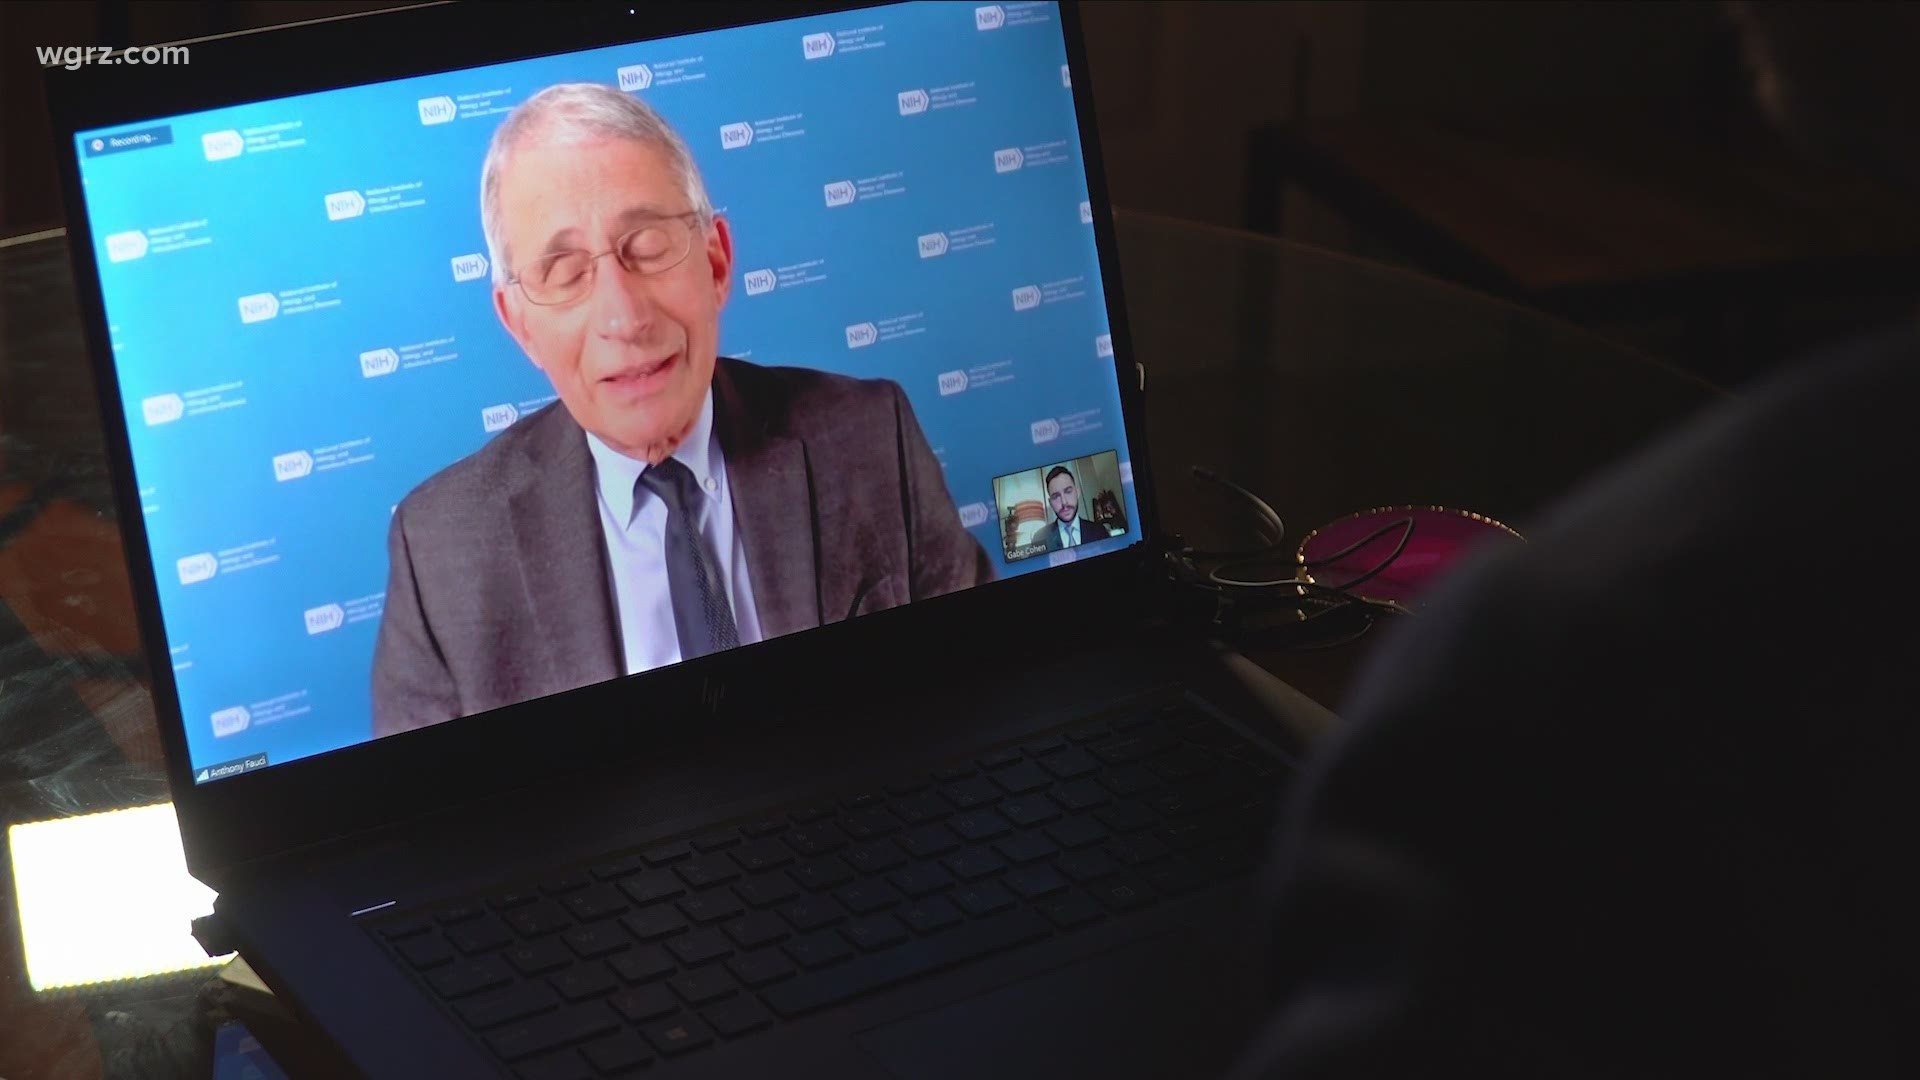 Doctor Anthony Fauci has been one of the most trusted voices in America this year GAbe Cohen from our TEGNA partners in Washington got the chance to talk to him.